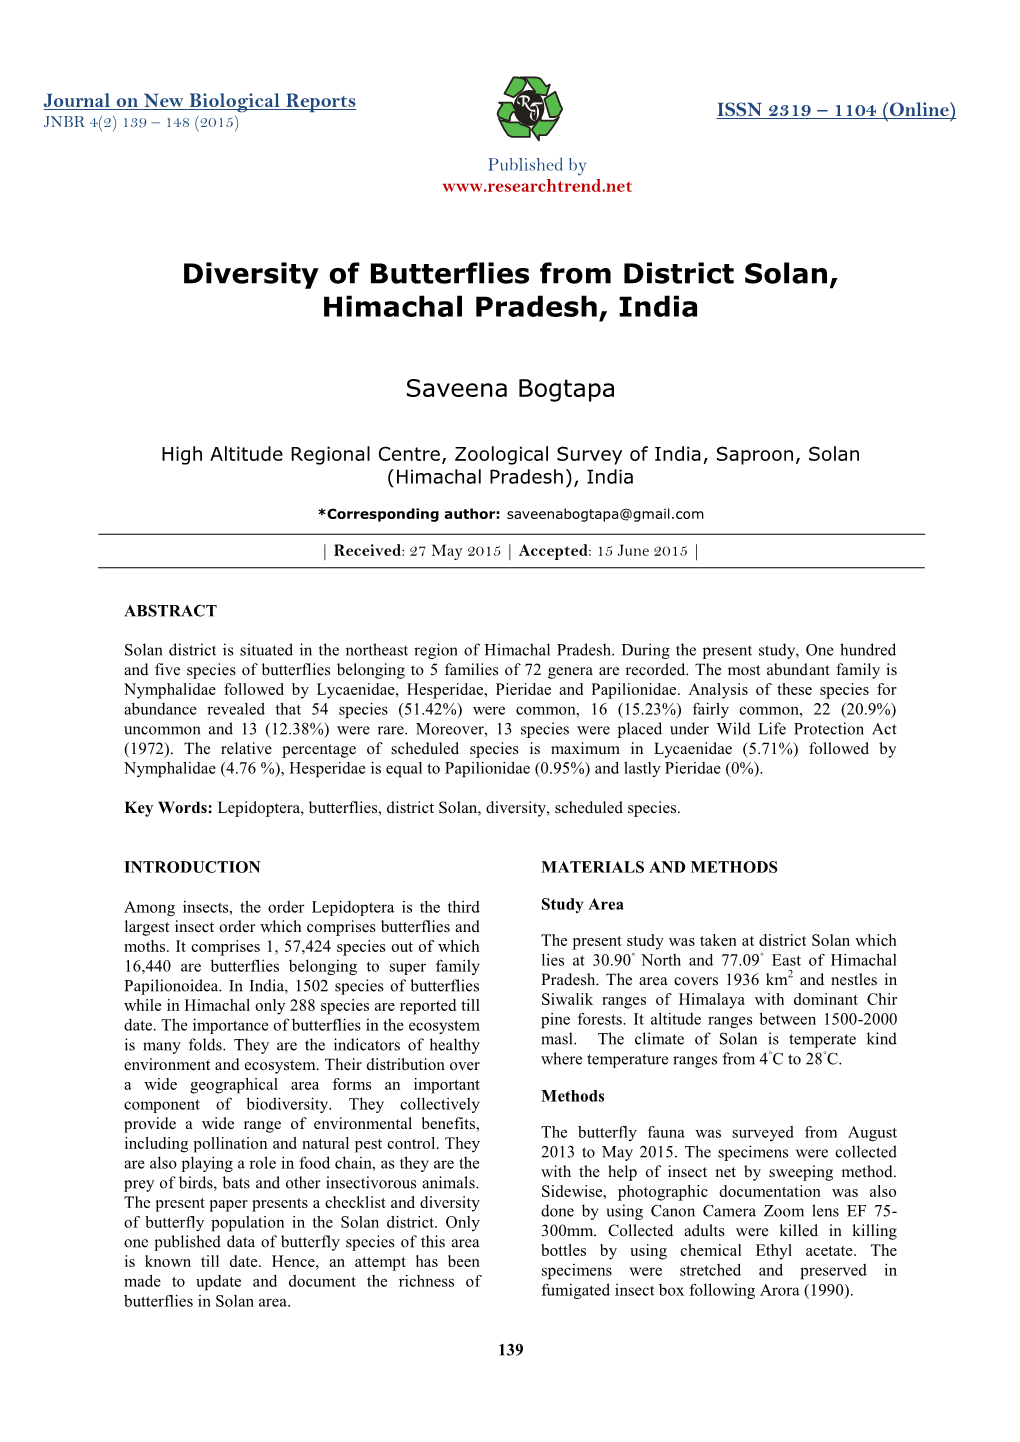 Diversity of Butterflies from District Solan, Himachal Pradesh, India